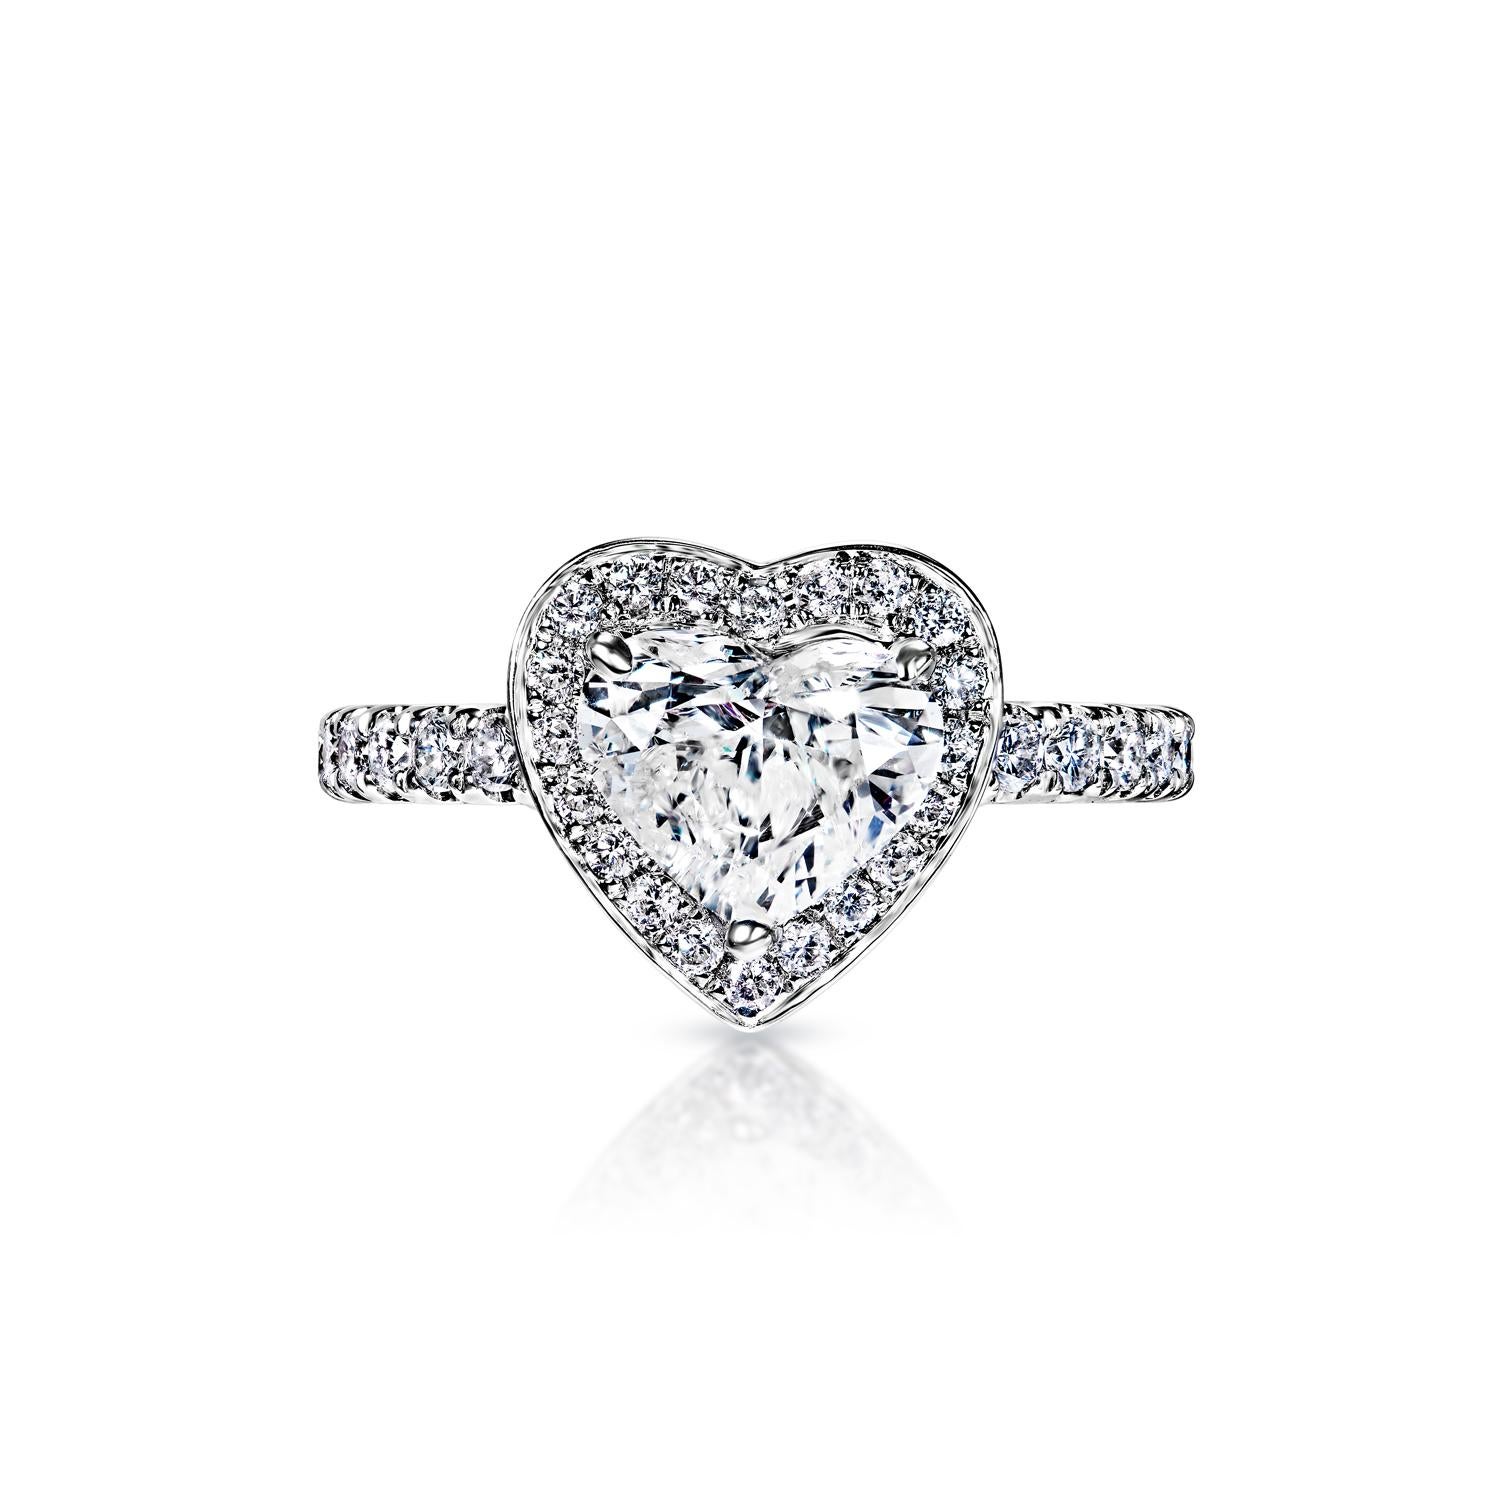 Kayla 2 Carat H SI3 Heart Shape Diamond Engagement Ring in 18k White Gold By Mike Nekta



Center Diamond:

Carat Weight: 1.18 Carats
Color : H
Clarity: SI3
Style: Heart Shape

Ring:
Settings: Halo, Sidestone, 3 Round Prong
Metal: 18 Karat White